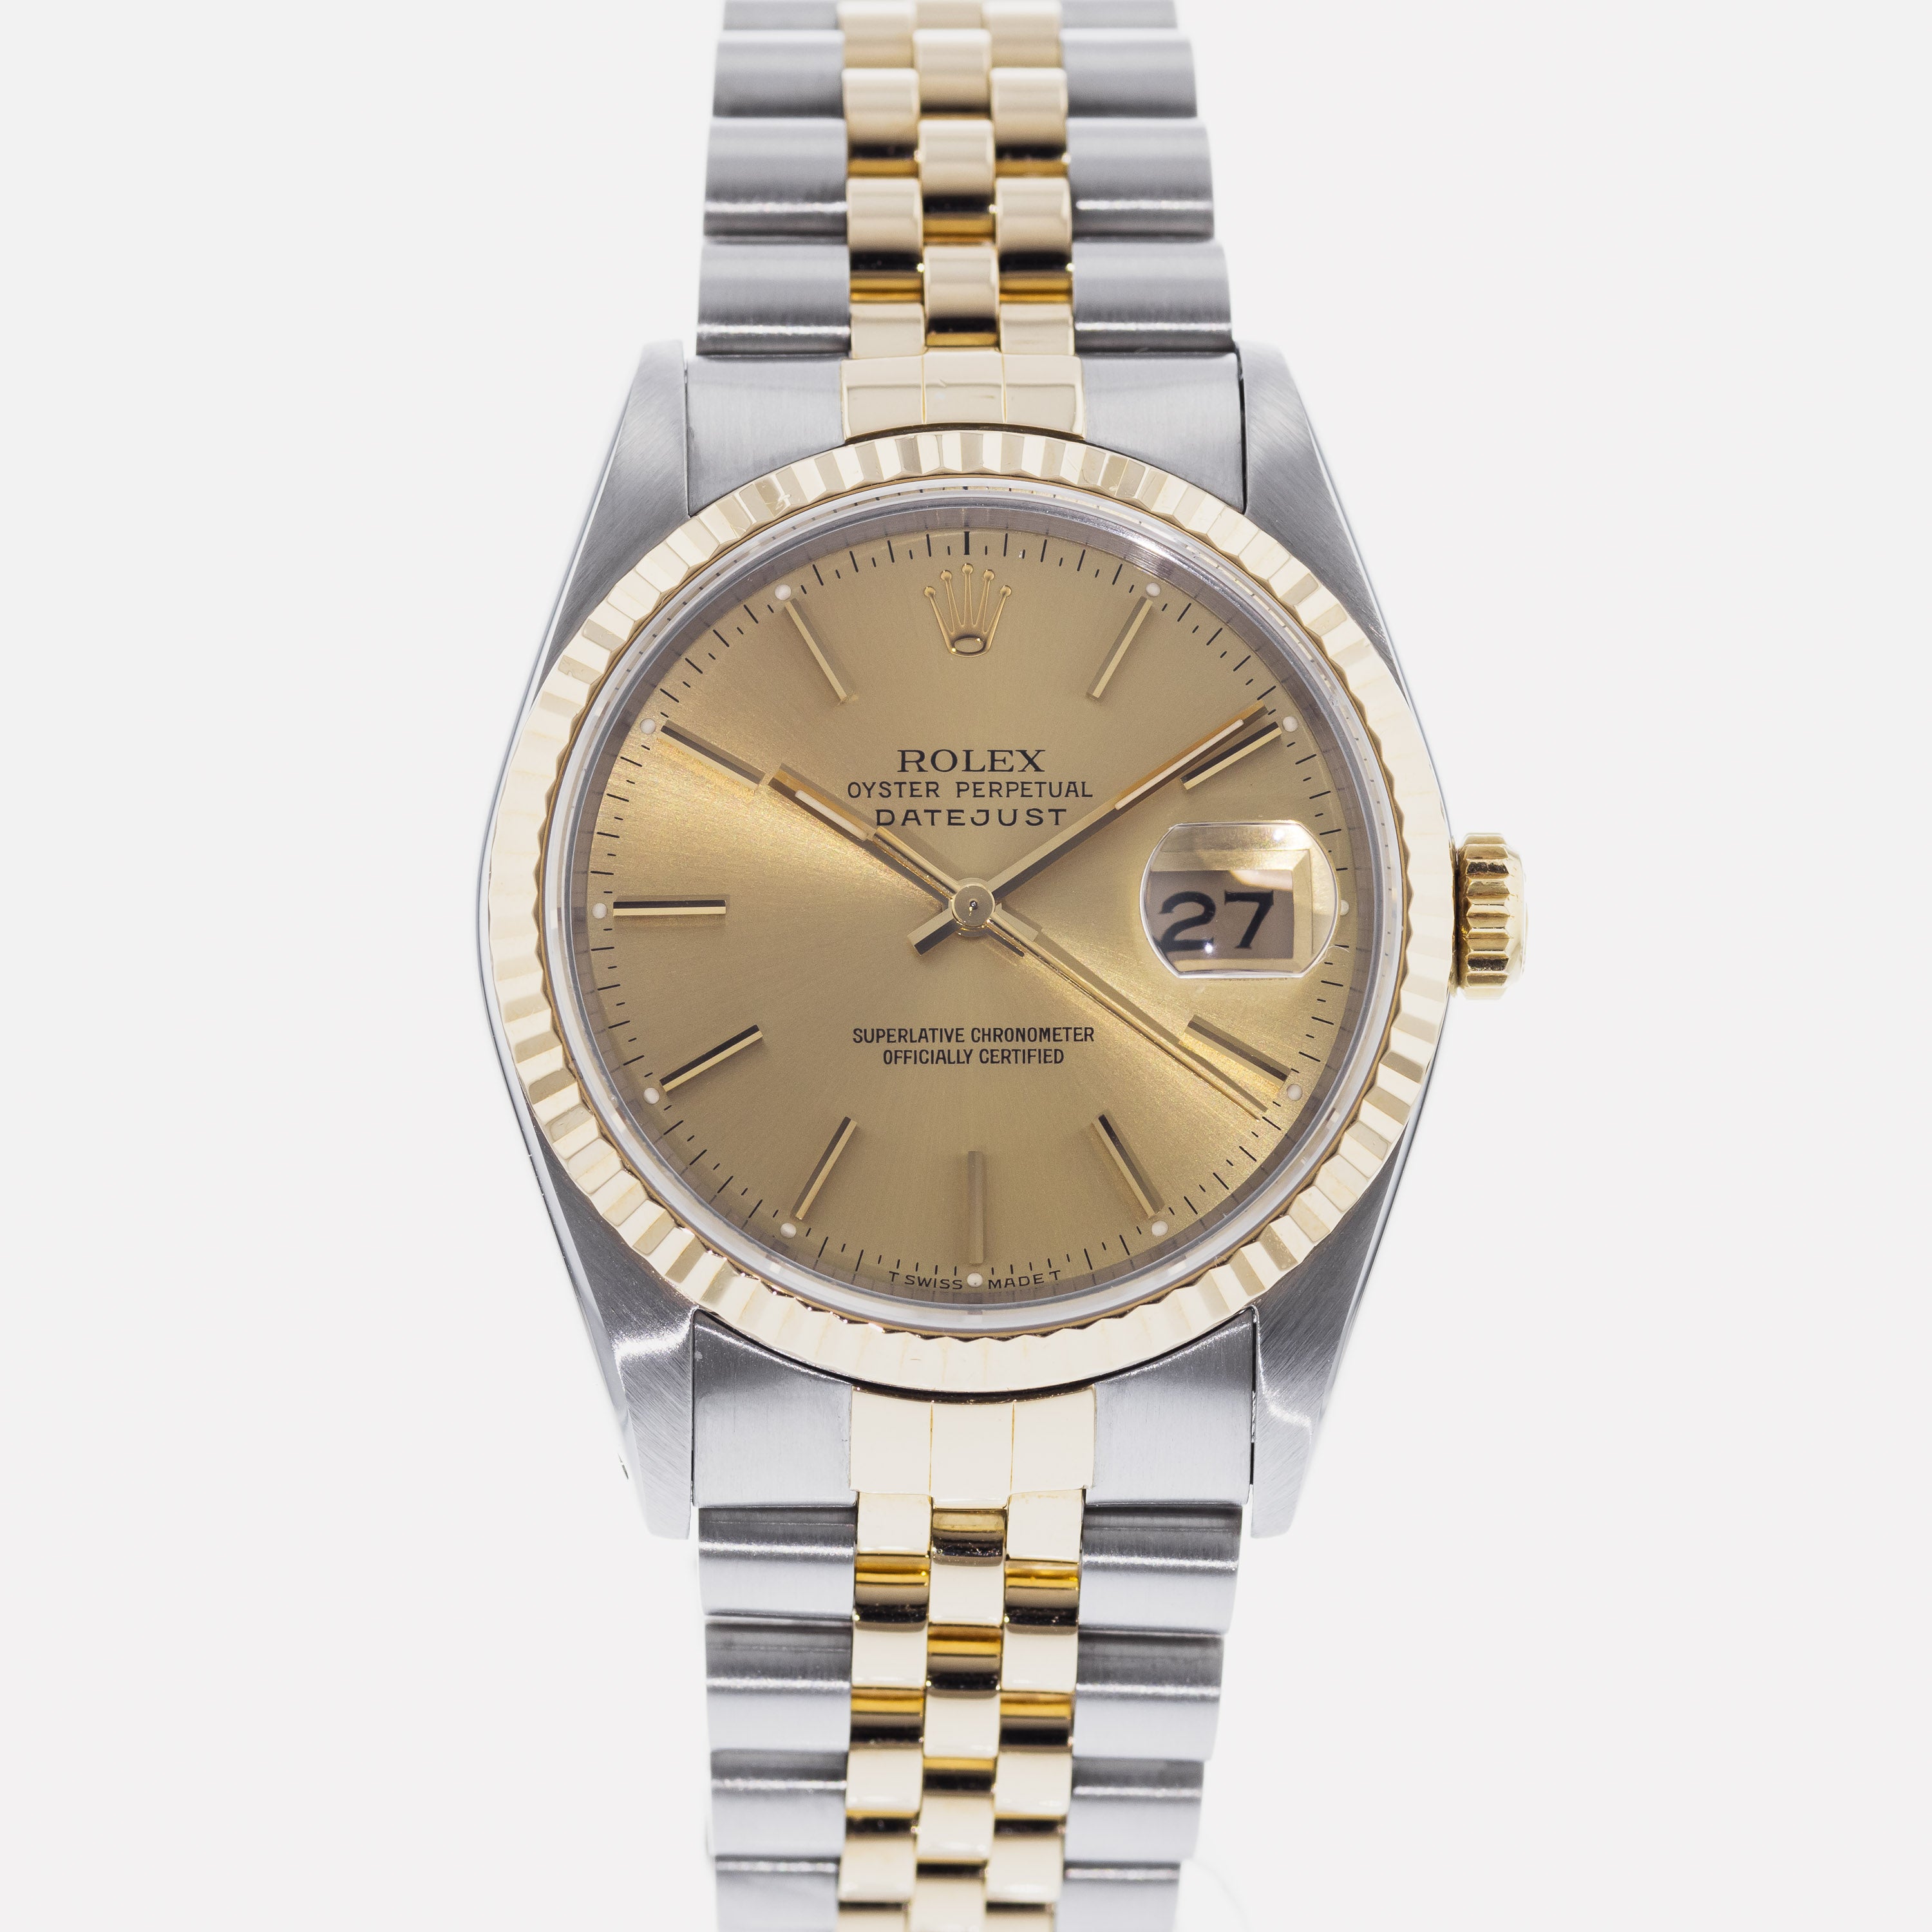 Rolex 16233 Oyster Perpetual Datejust Price to Sell